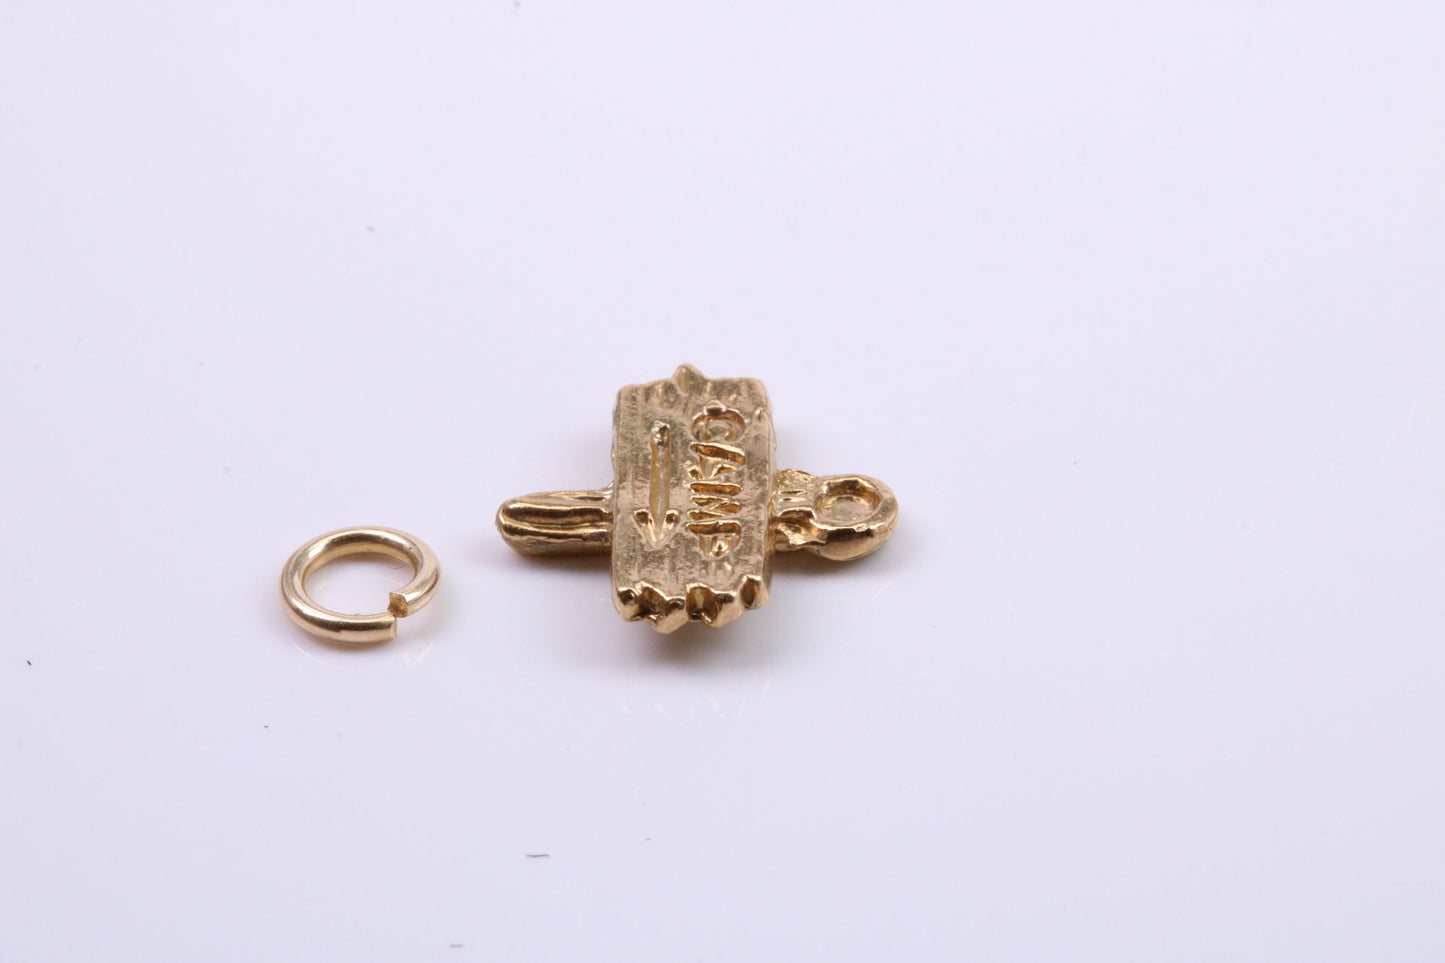 Camping Charm, Traditional Charm, Made from Solid 9ct Yellow Gold, British Hallmarked, Complete with Attachment Link